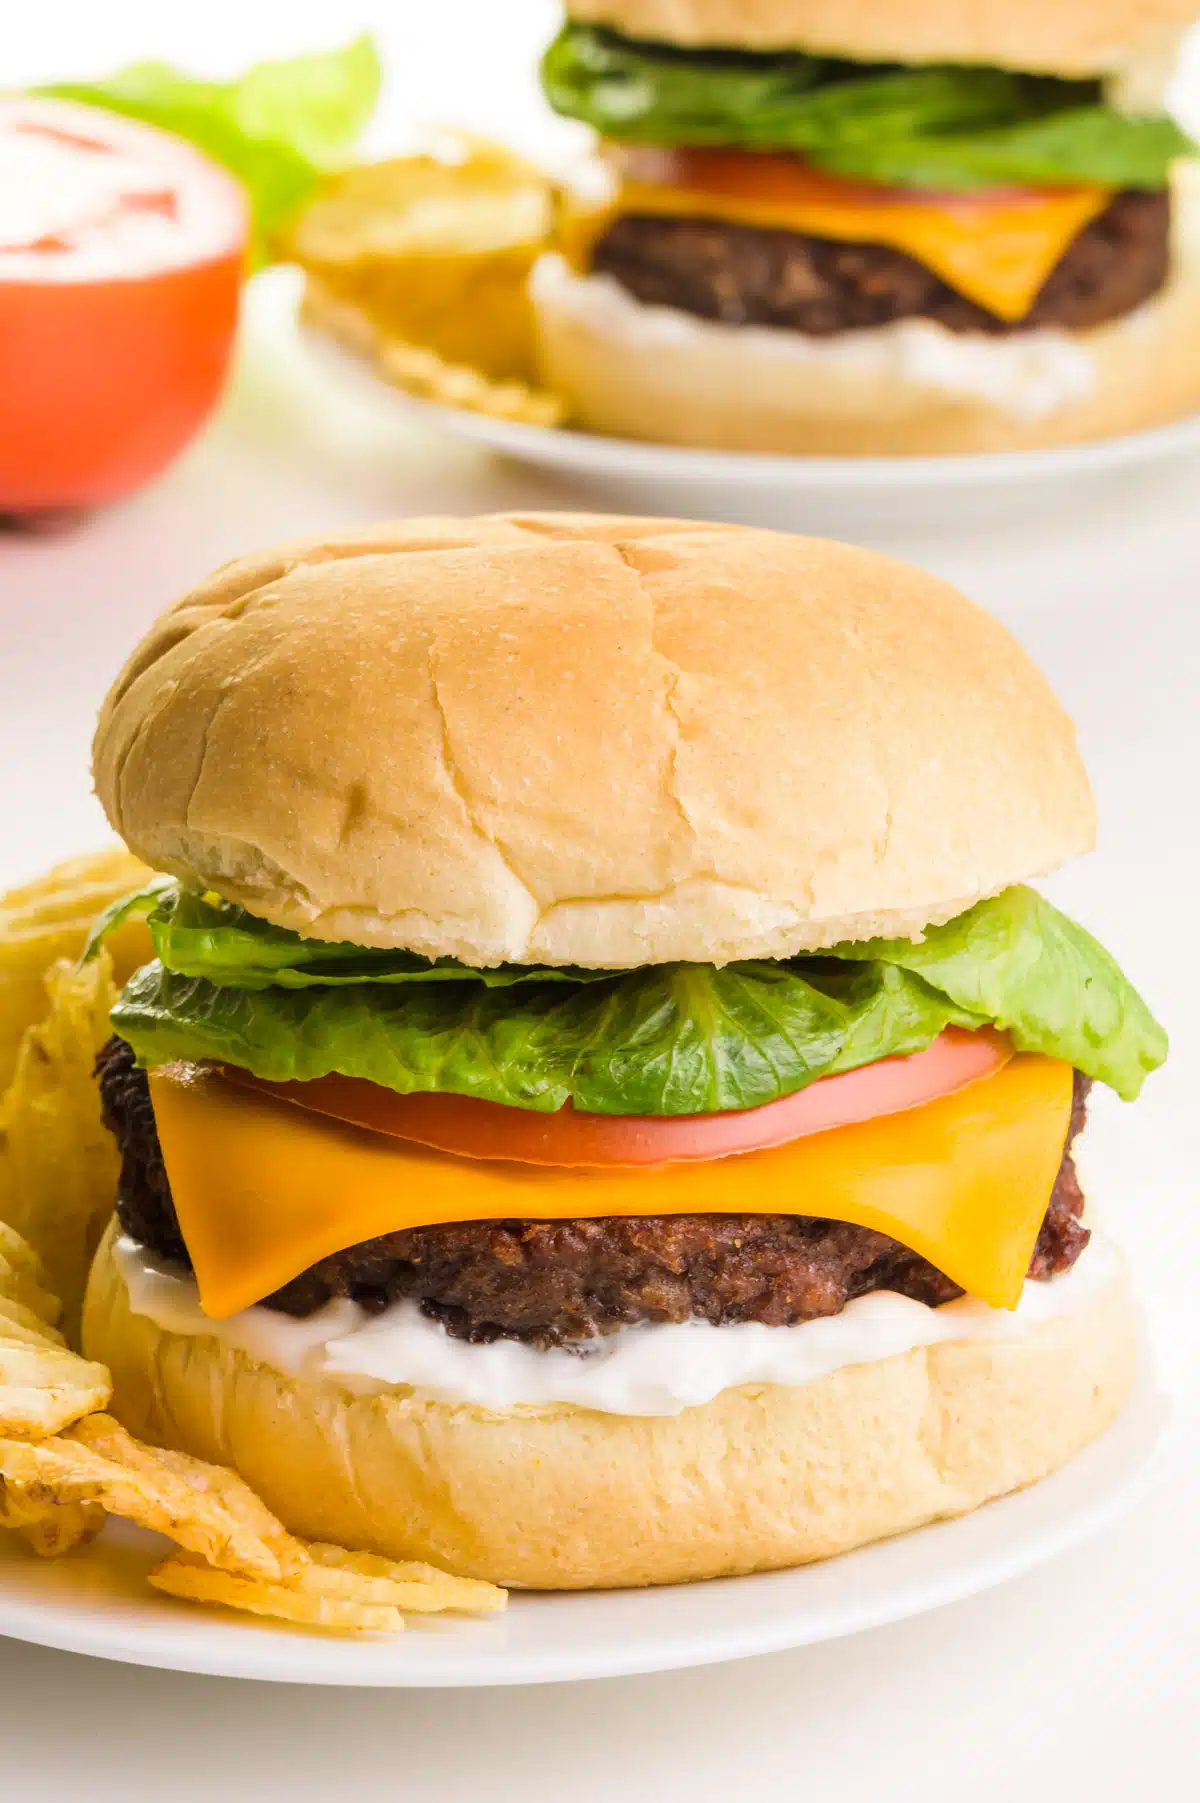 A cheeseburger is on a bun with other toppings such as mayo, tomato and greens.  It sits on a plate with potato chips.  In the background is another burger with a slice of tomato.